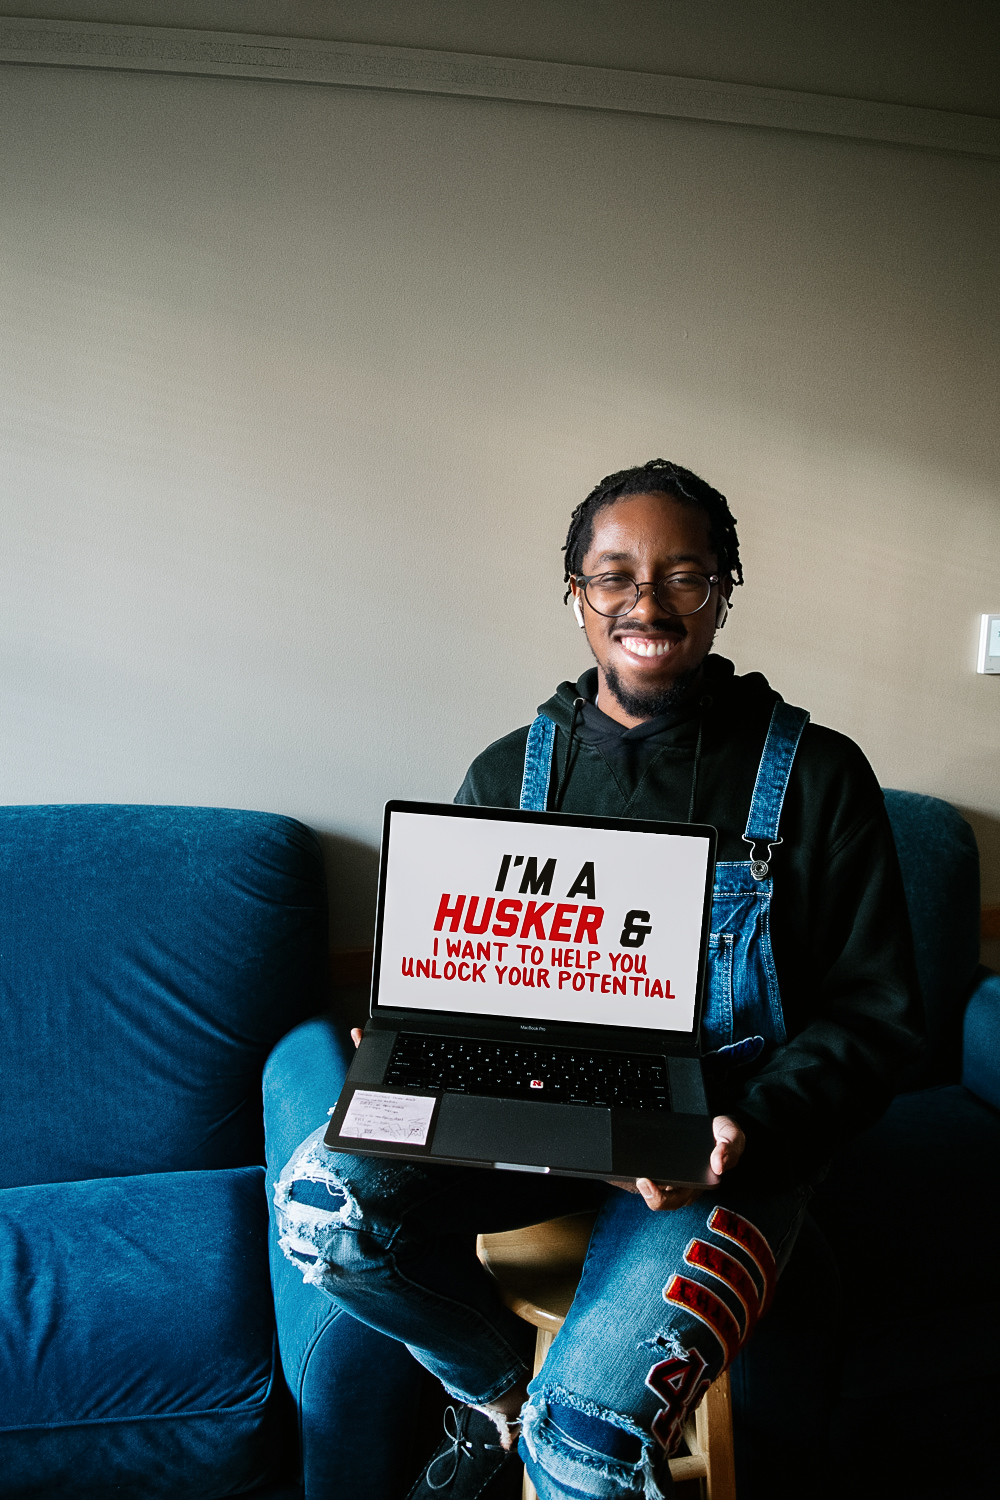 Eric holding a sign that says "I'm a Husker and I want to help you unlock your potential."